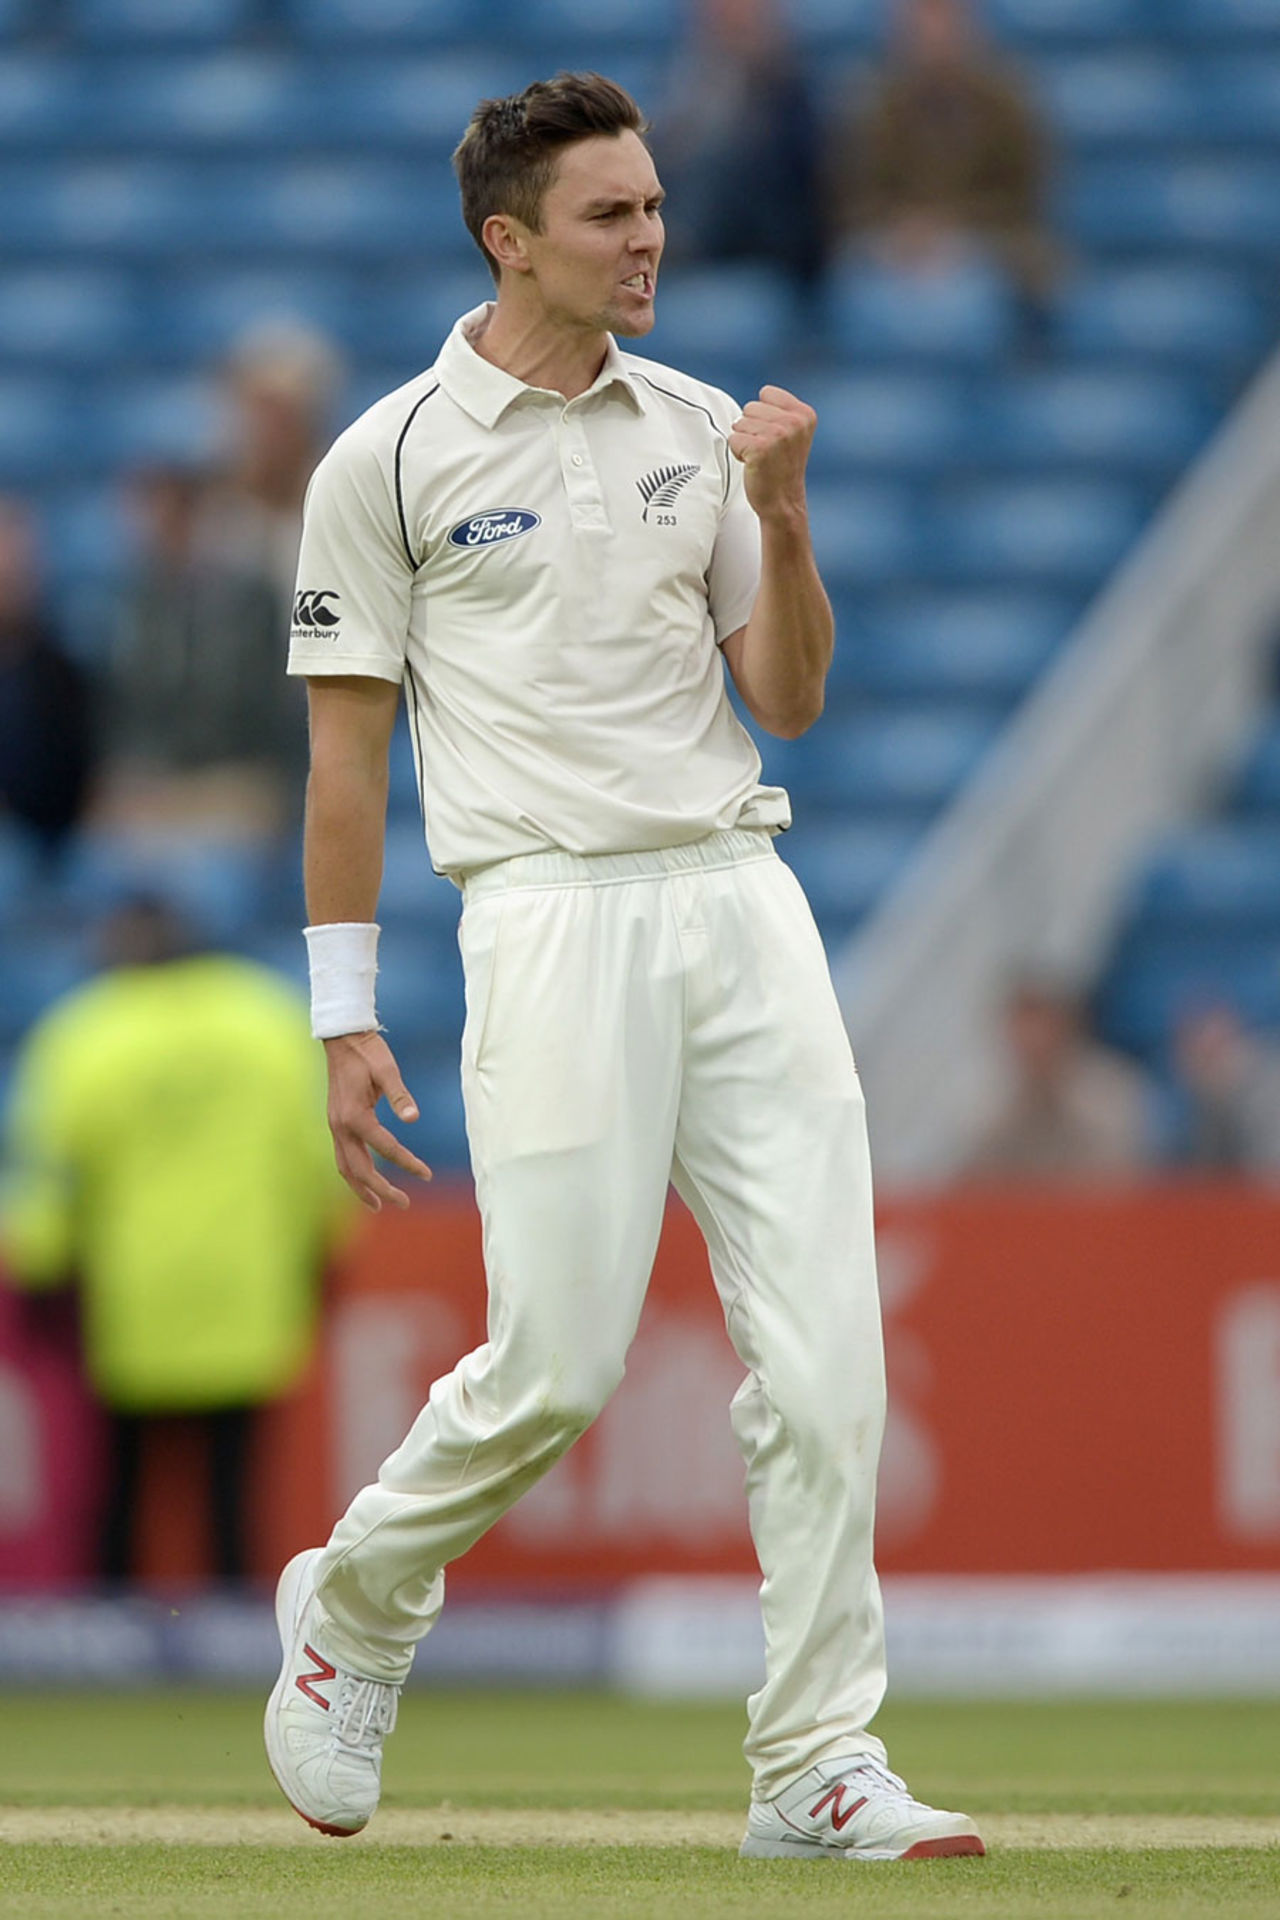 Trent Boult picked up two wickets with the second new ball, England v New Zealand, 2nd Investec Test, Headingley, 2nd day, May 30, 2015